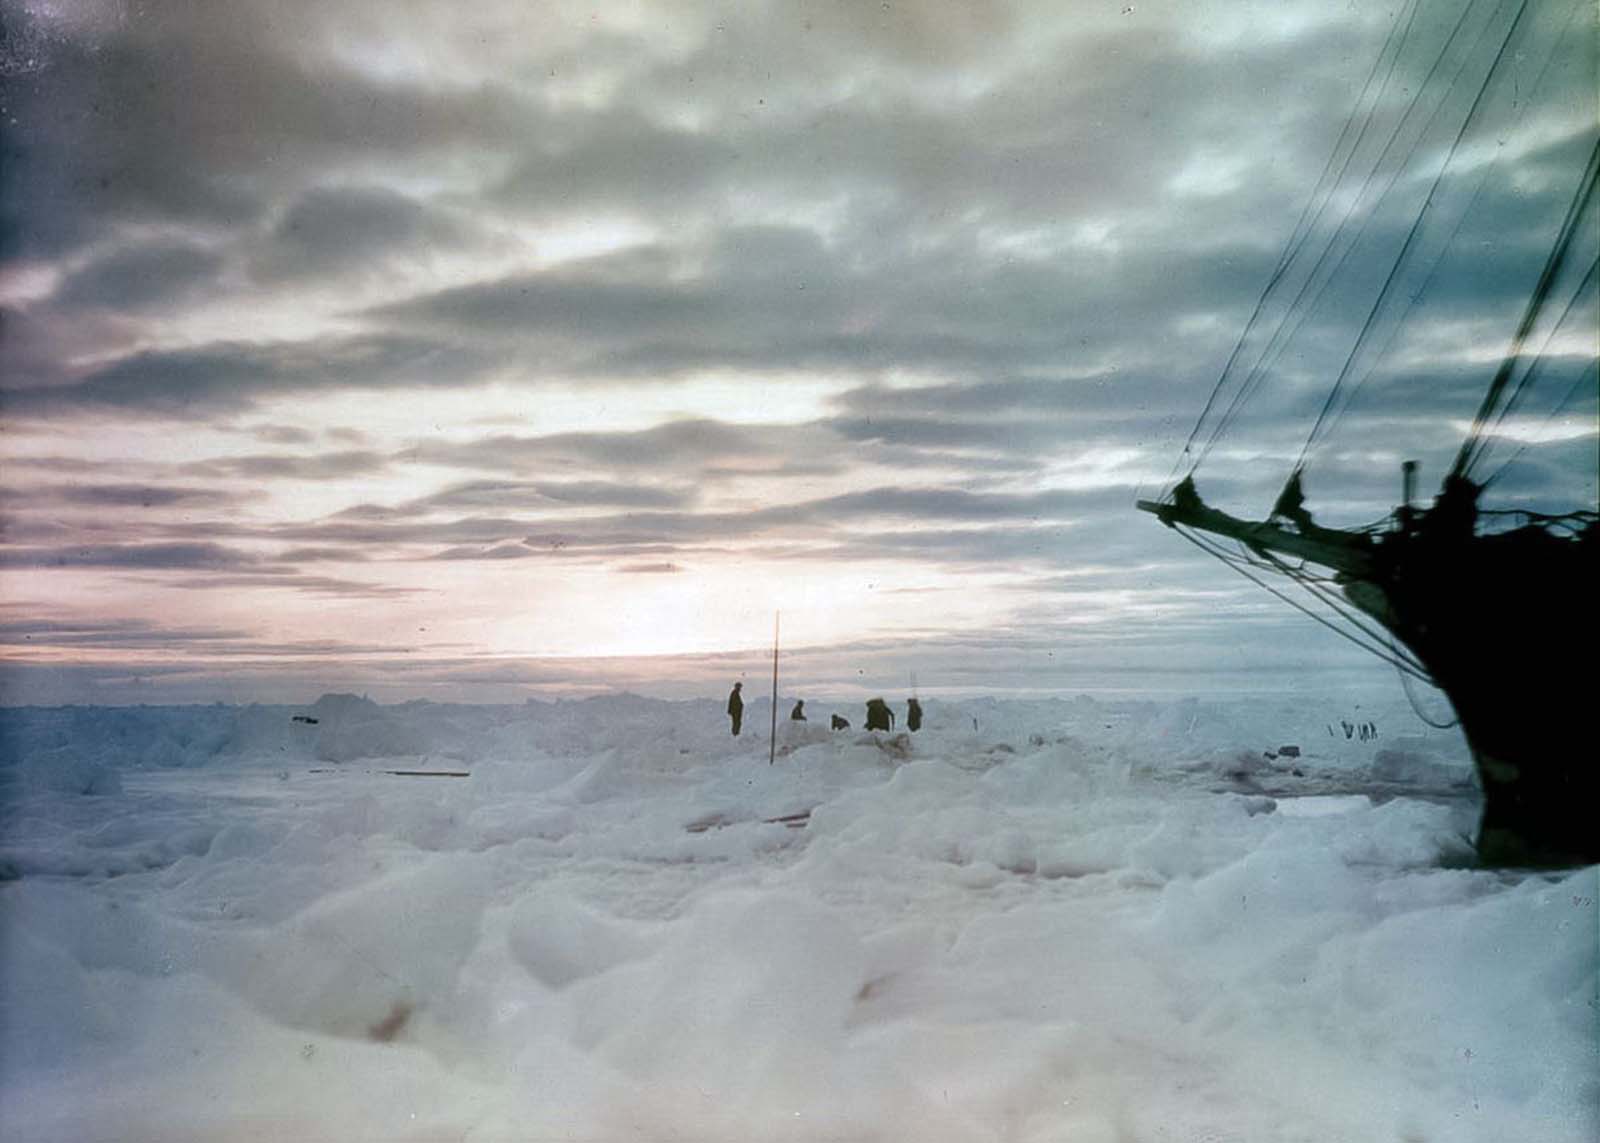 Stunning Historical Photos of Shackleton's Expedition to Antarctica, 1914-1917